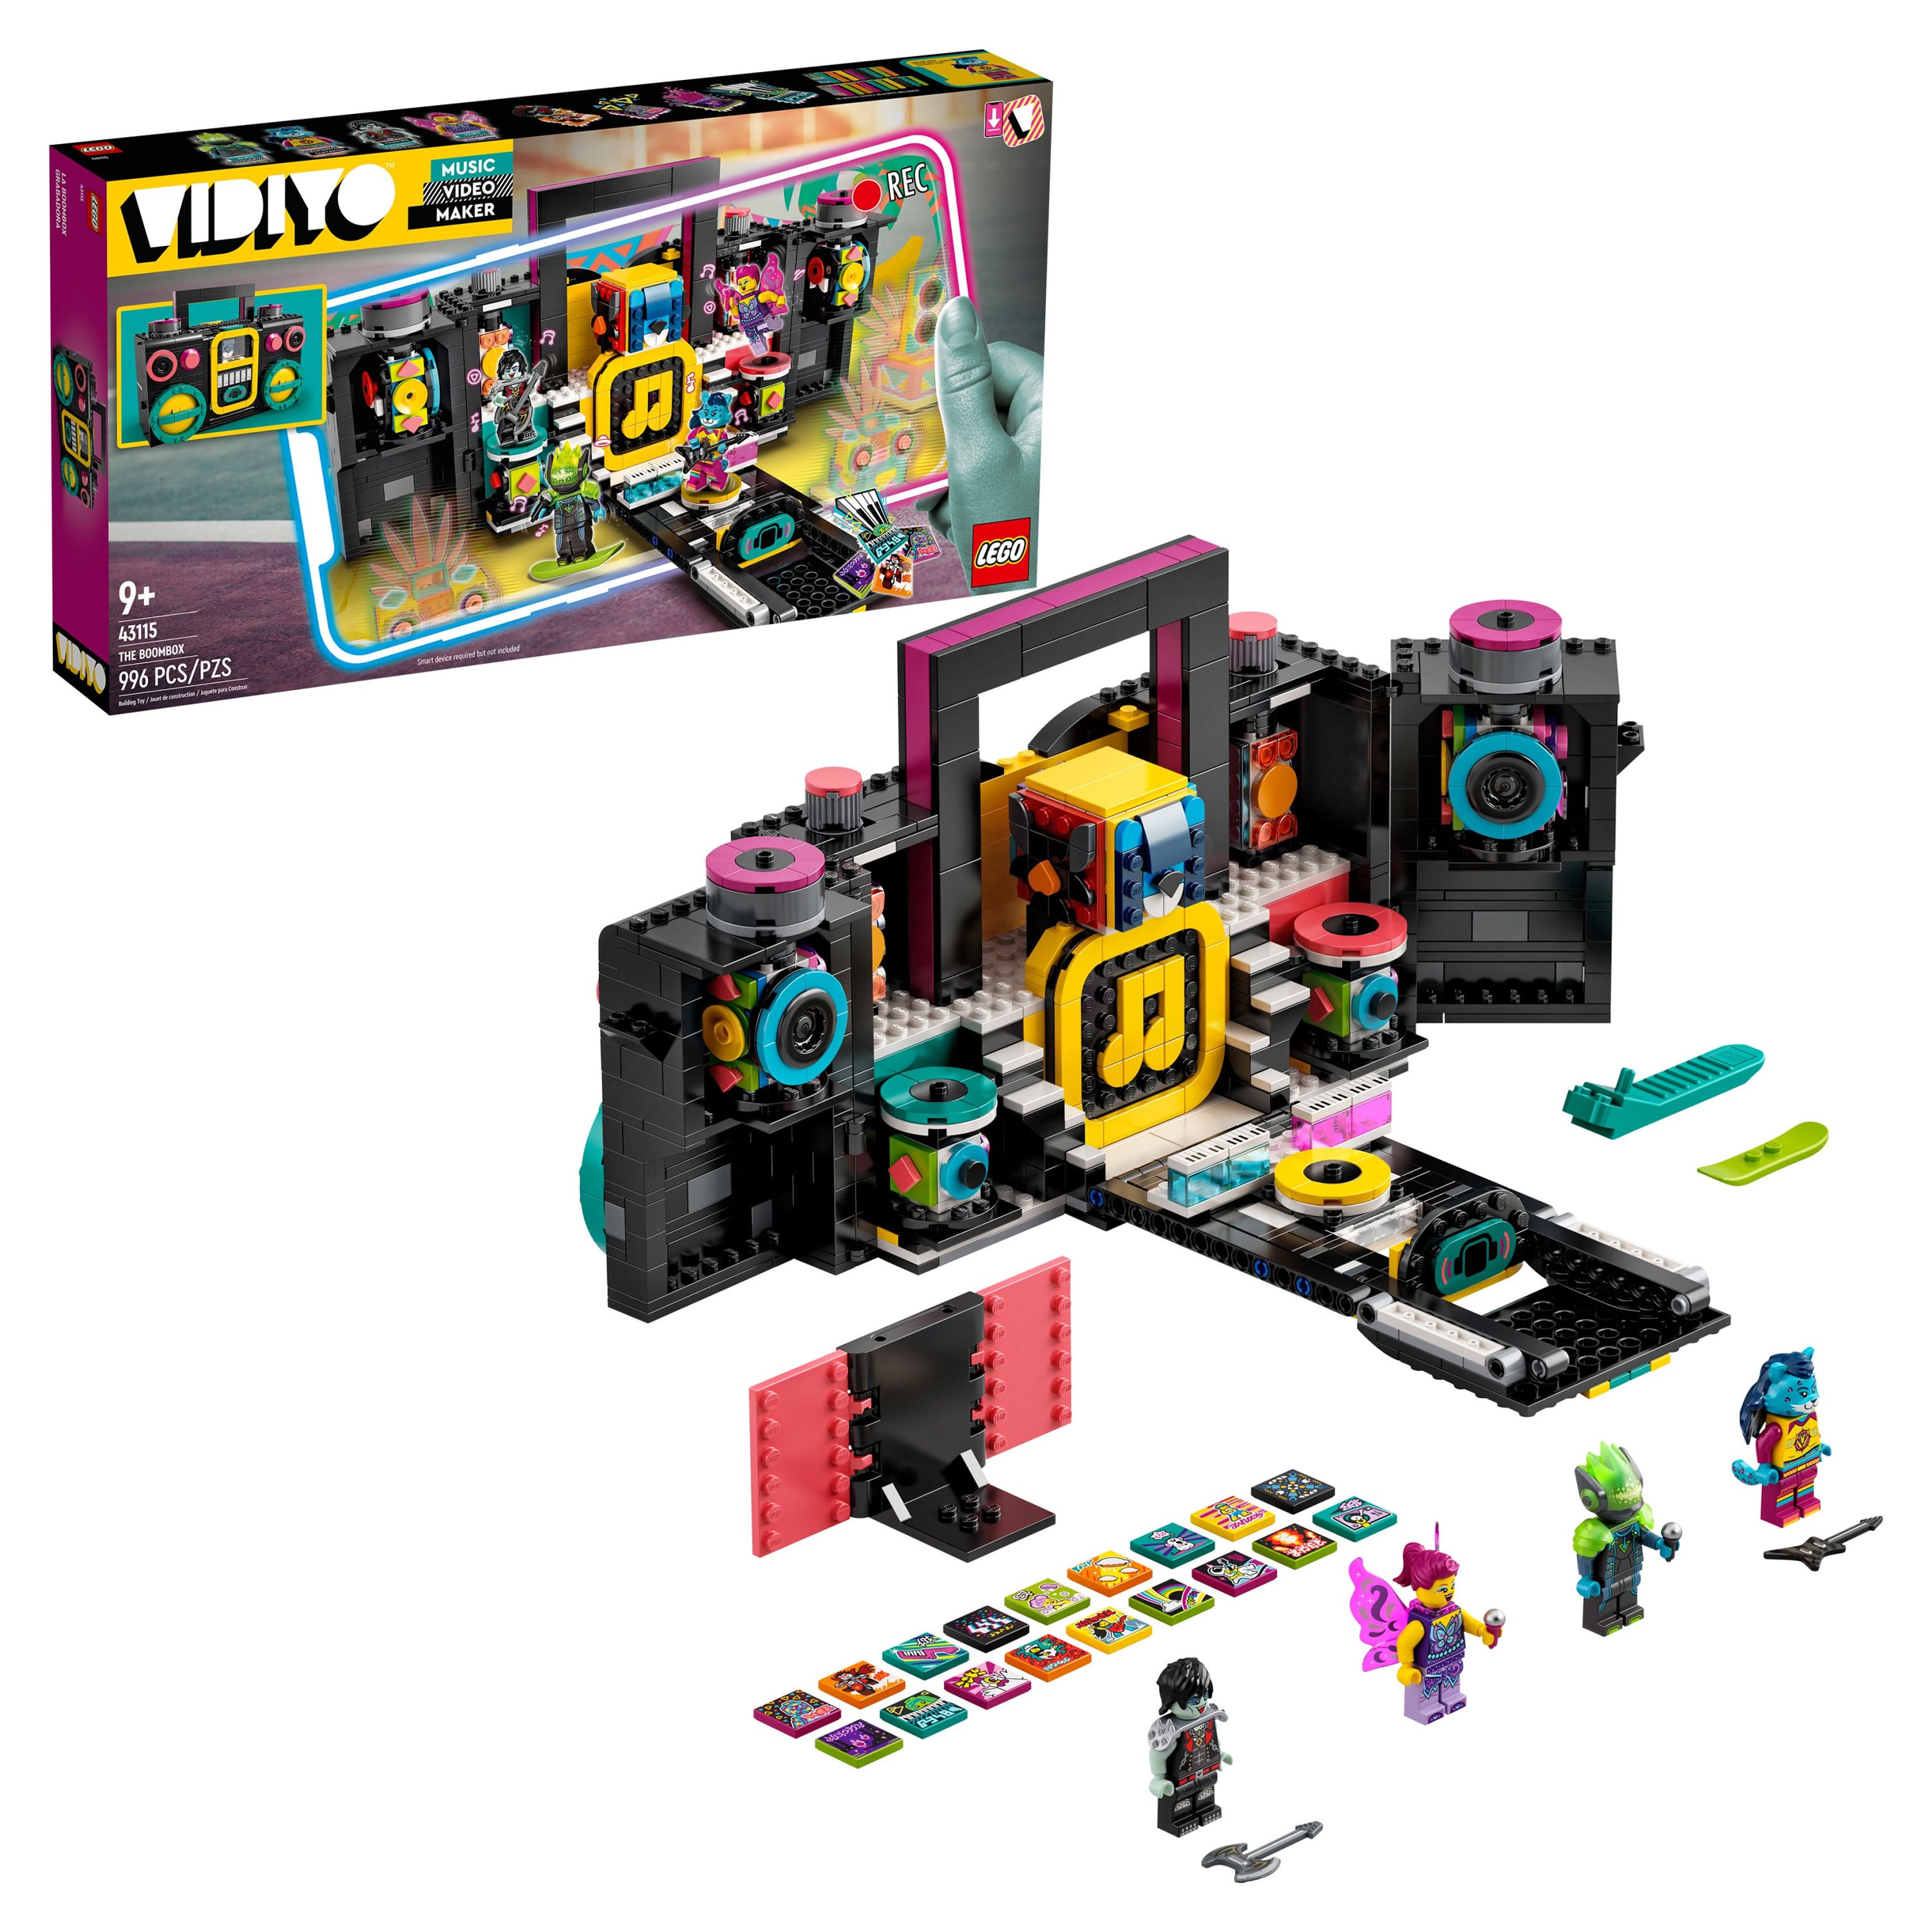 LEGO VIDIYO The Boombox 43115 Inspire Kids to Direct and Star in Their Own Music Videos (996 Pieces) - image 1 of 7